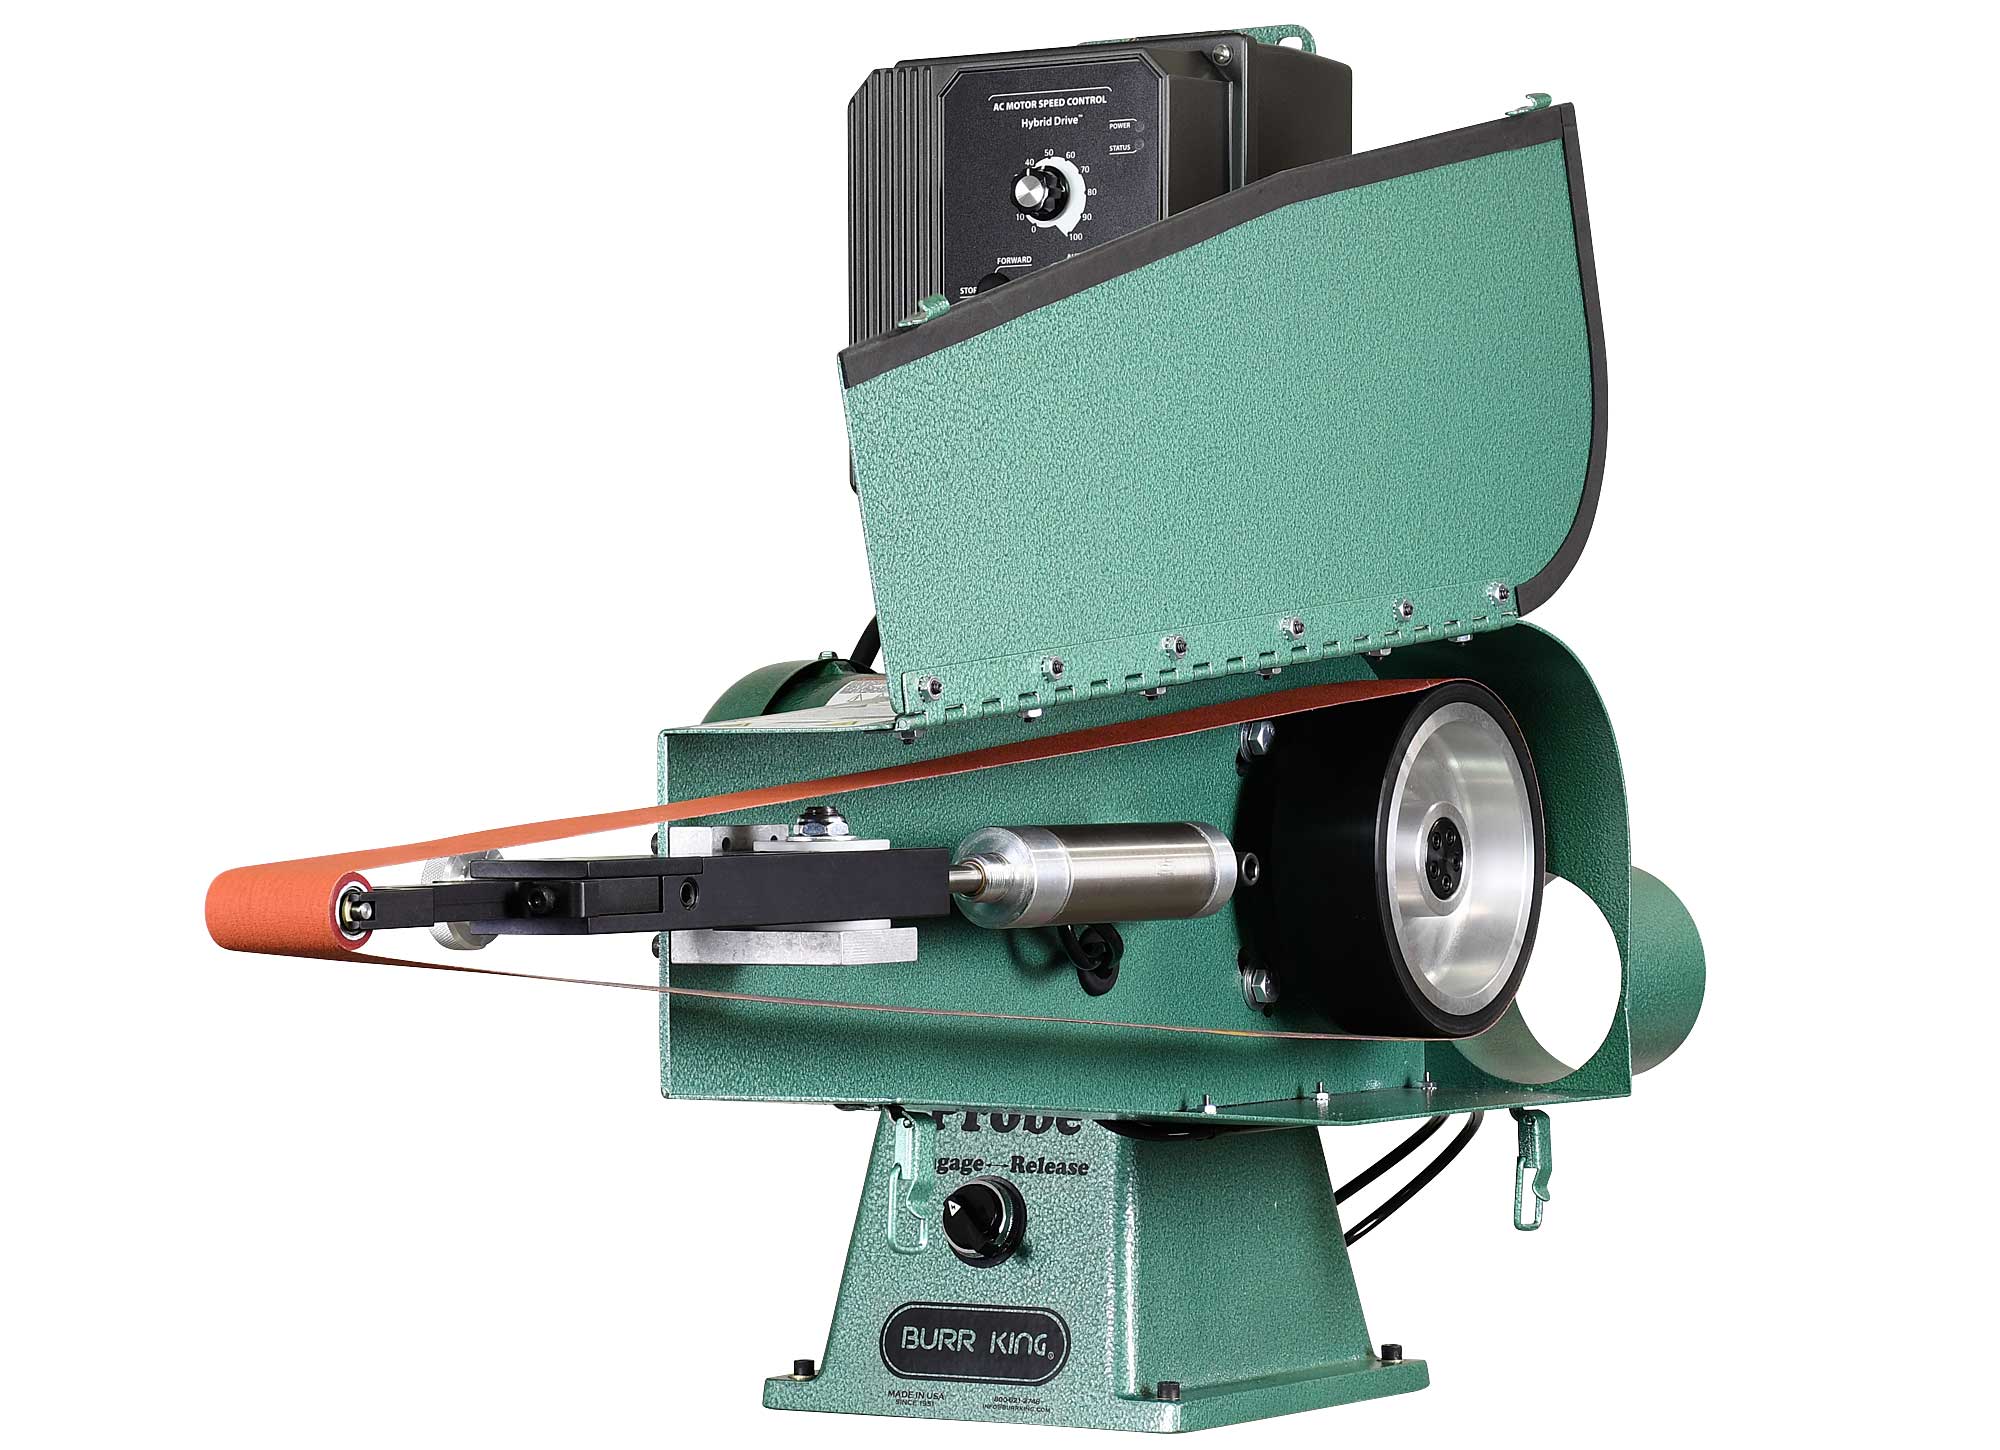 Simplified air tension system allows you to control the amount of force on the abrasive belt.